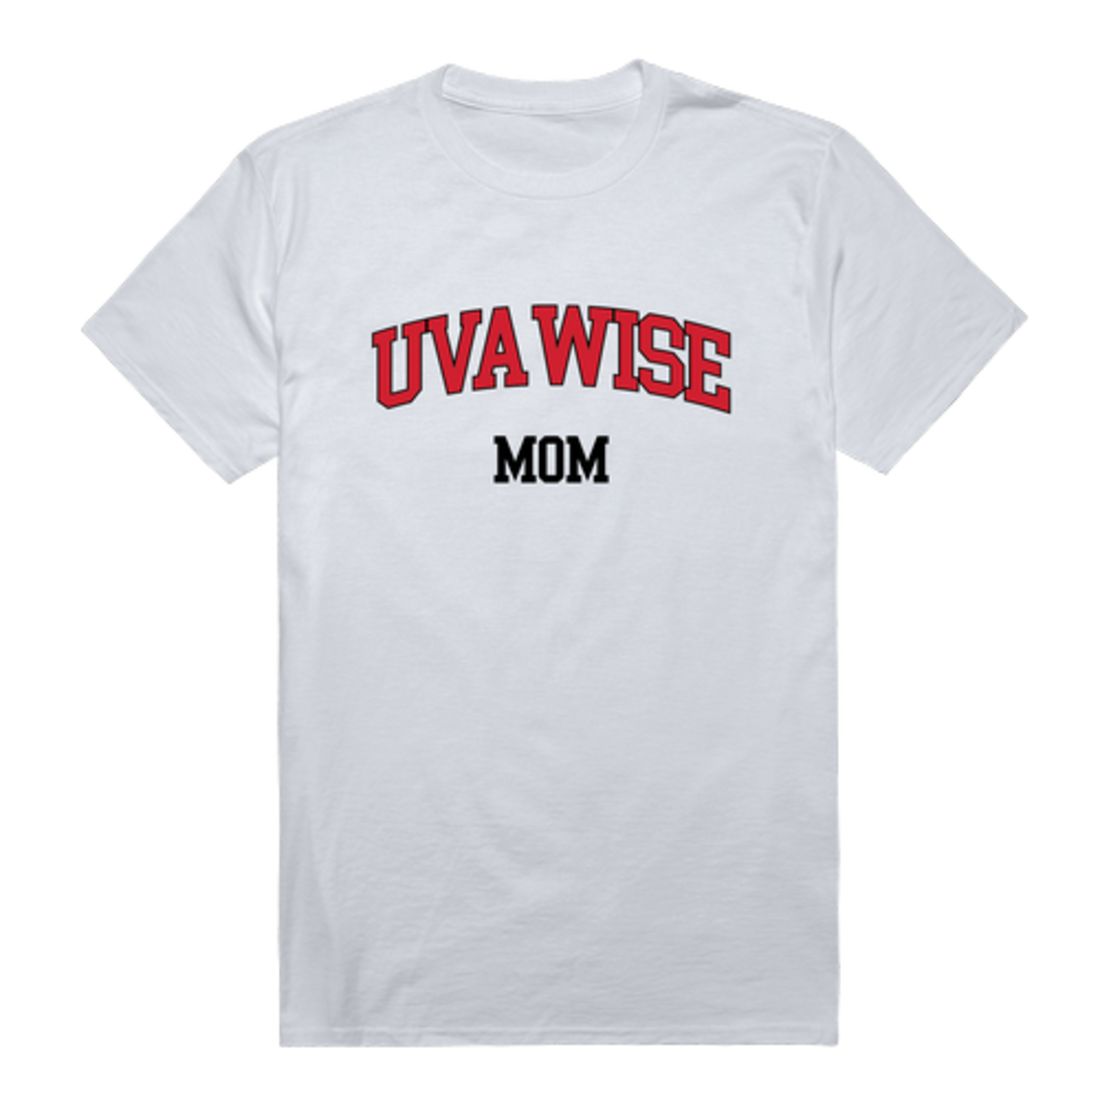 University of Virginia's College at Wise Cavaliers Mom T-Shirt